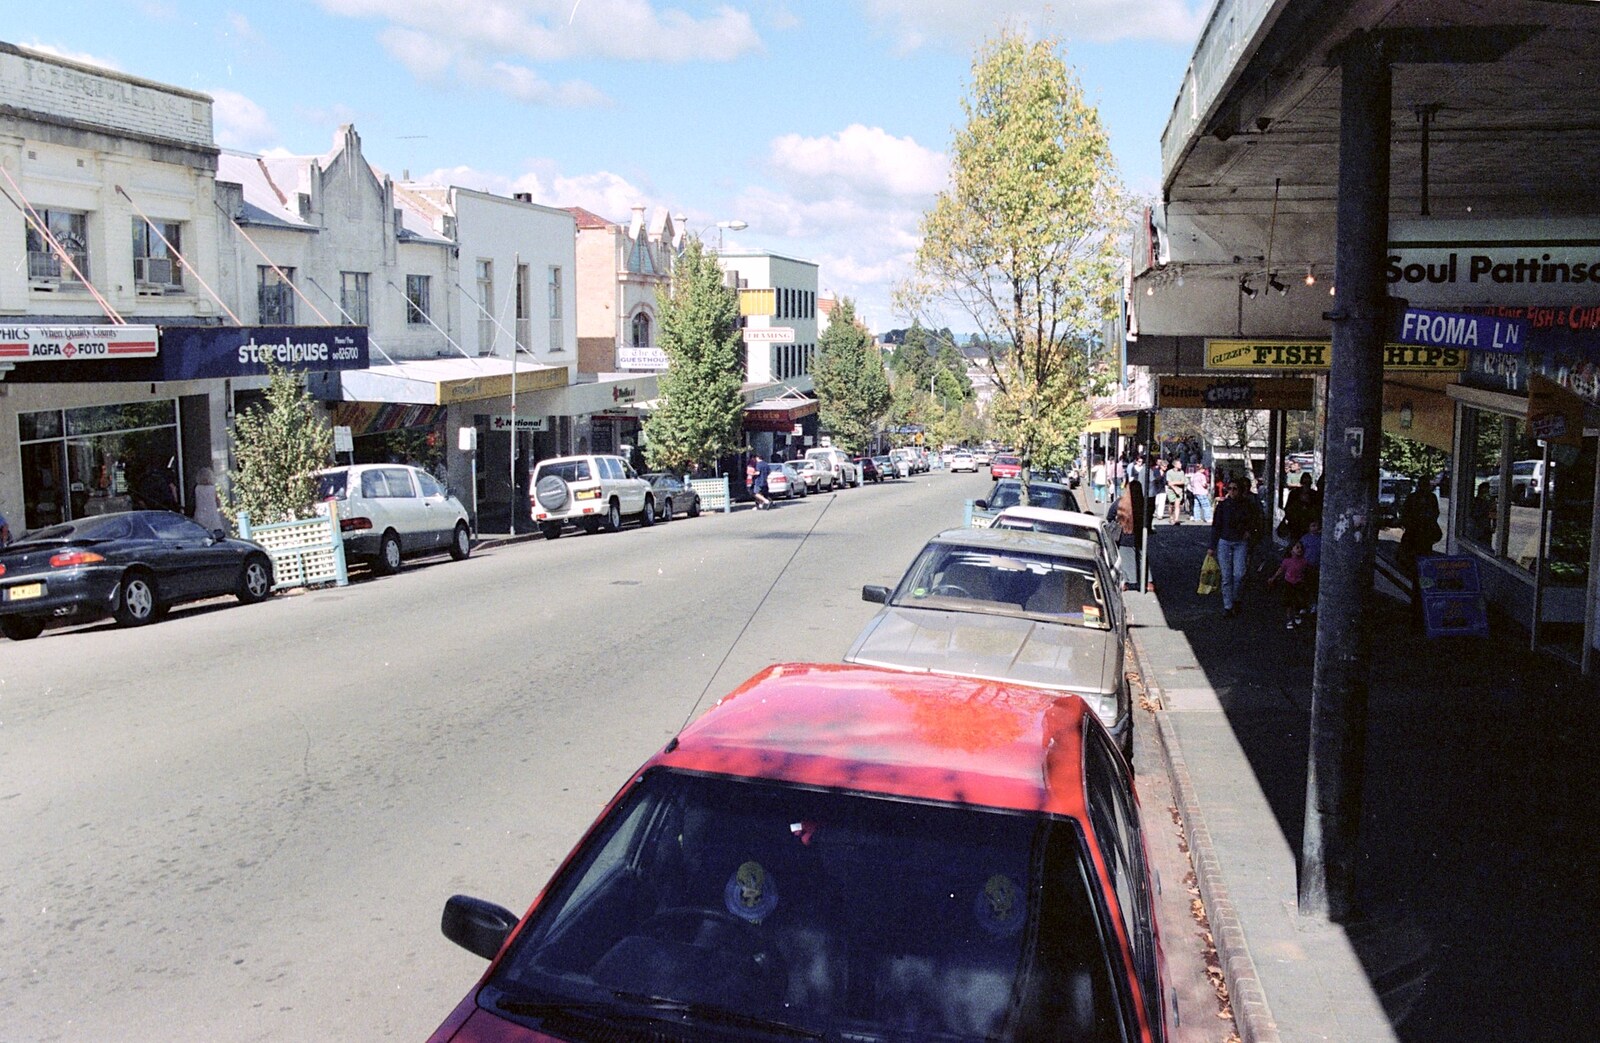 The High Street in Parramatta from A Trip to the Blue Mountains, New South Wales, Australia - 12th April 2000